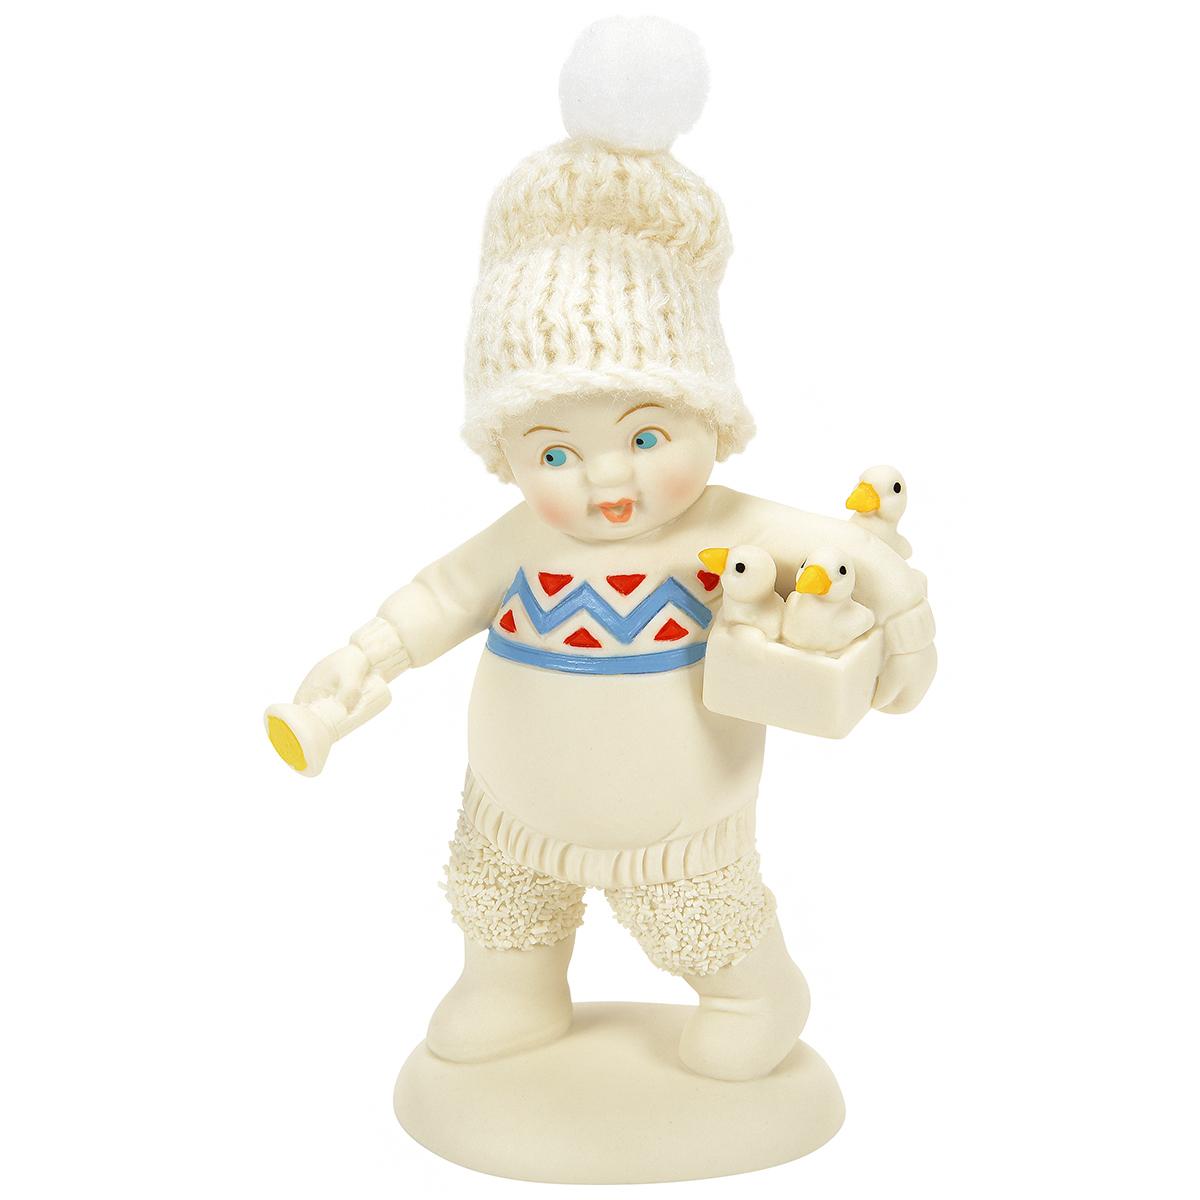 Collecting The Baby Puffins Snowbaby Figurine